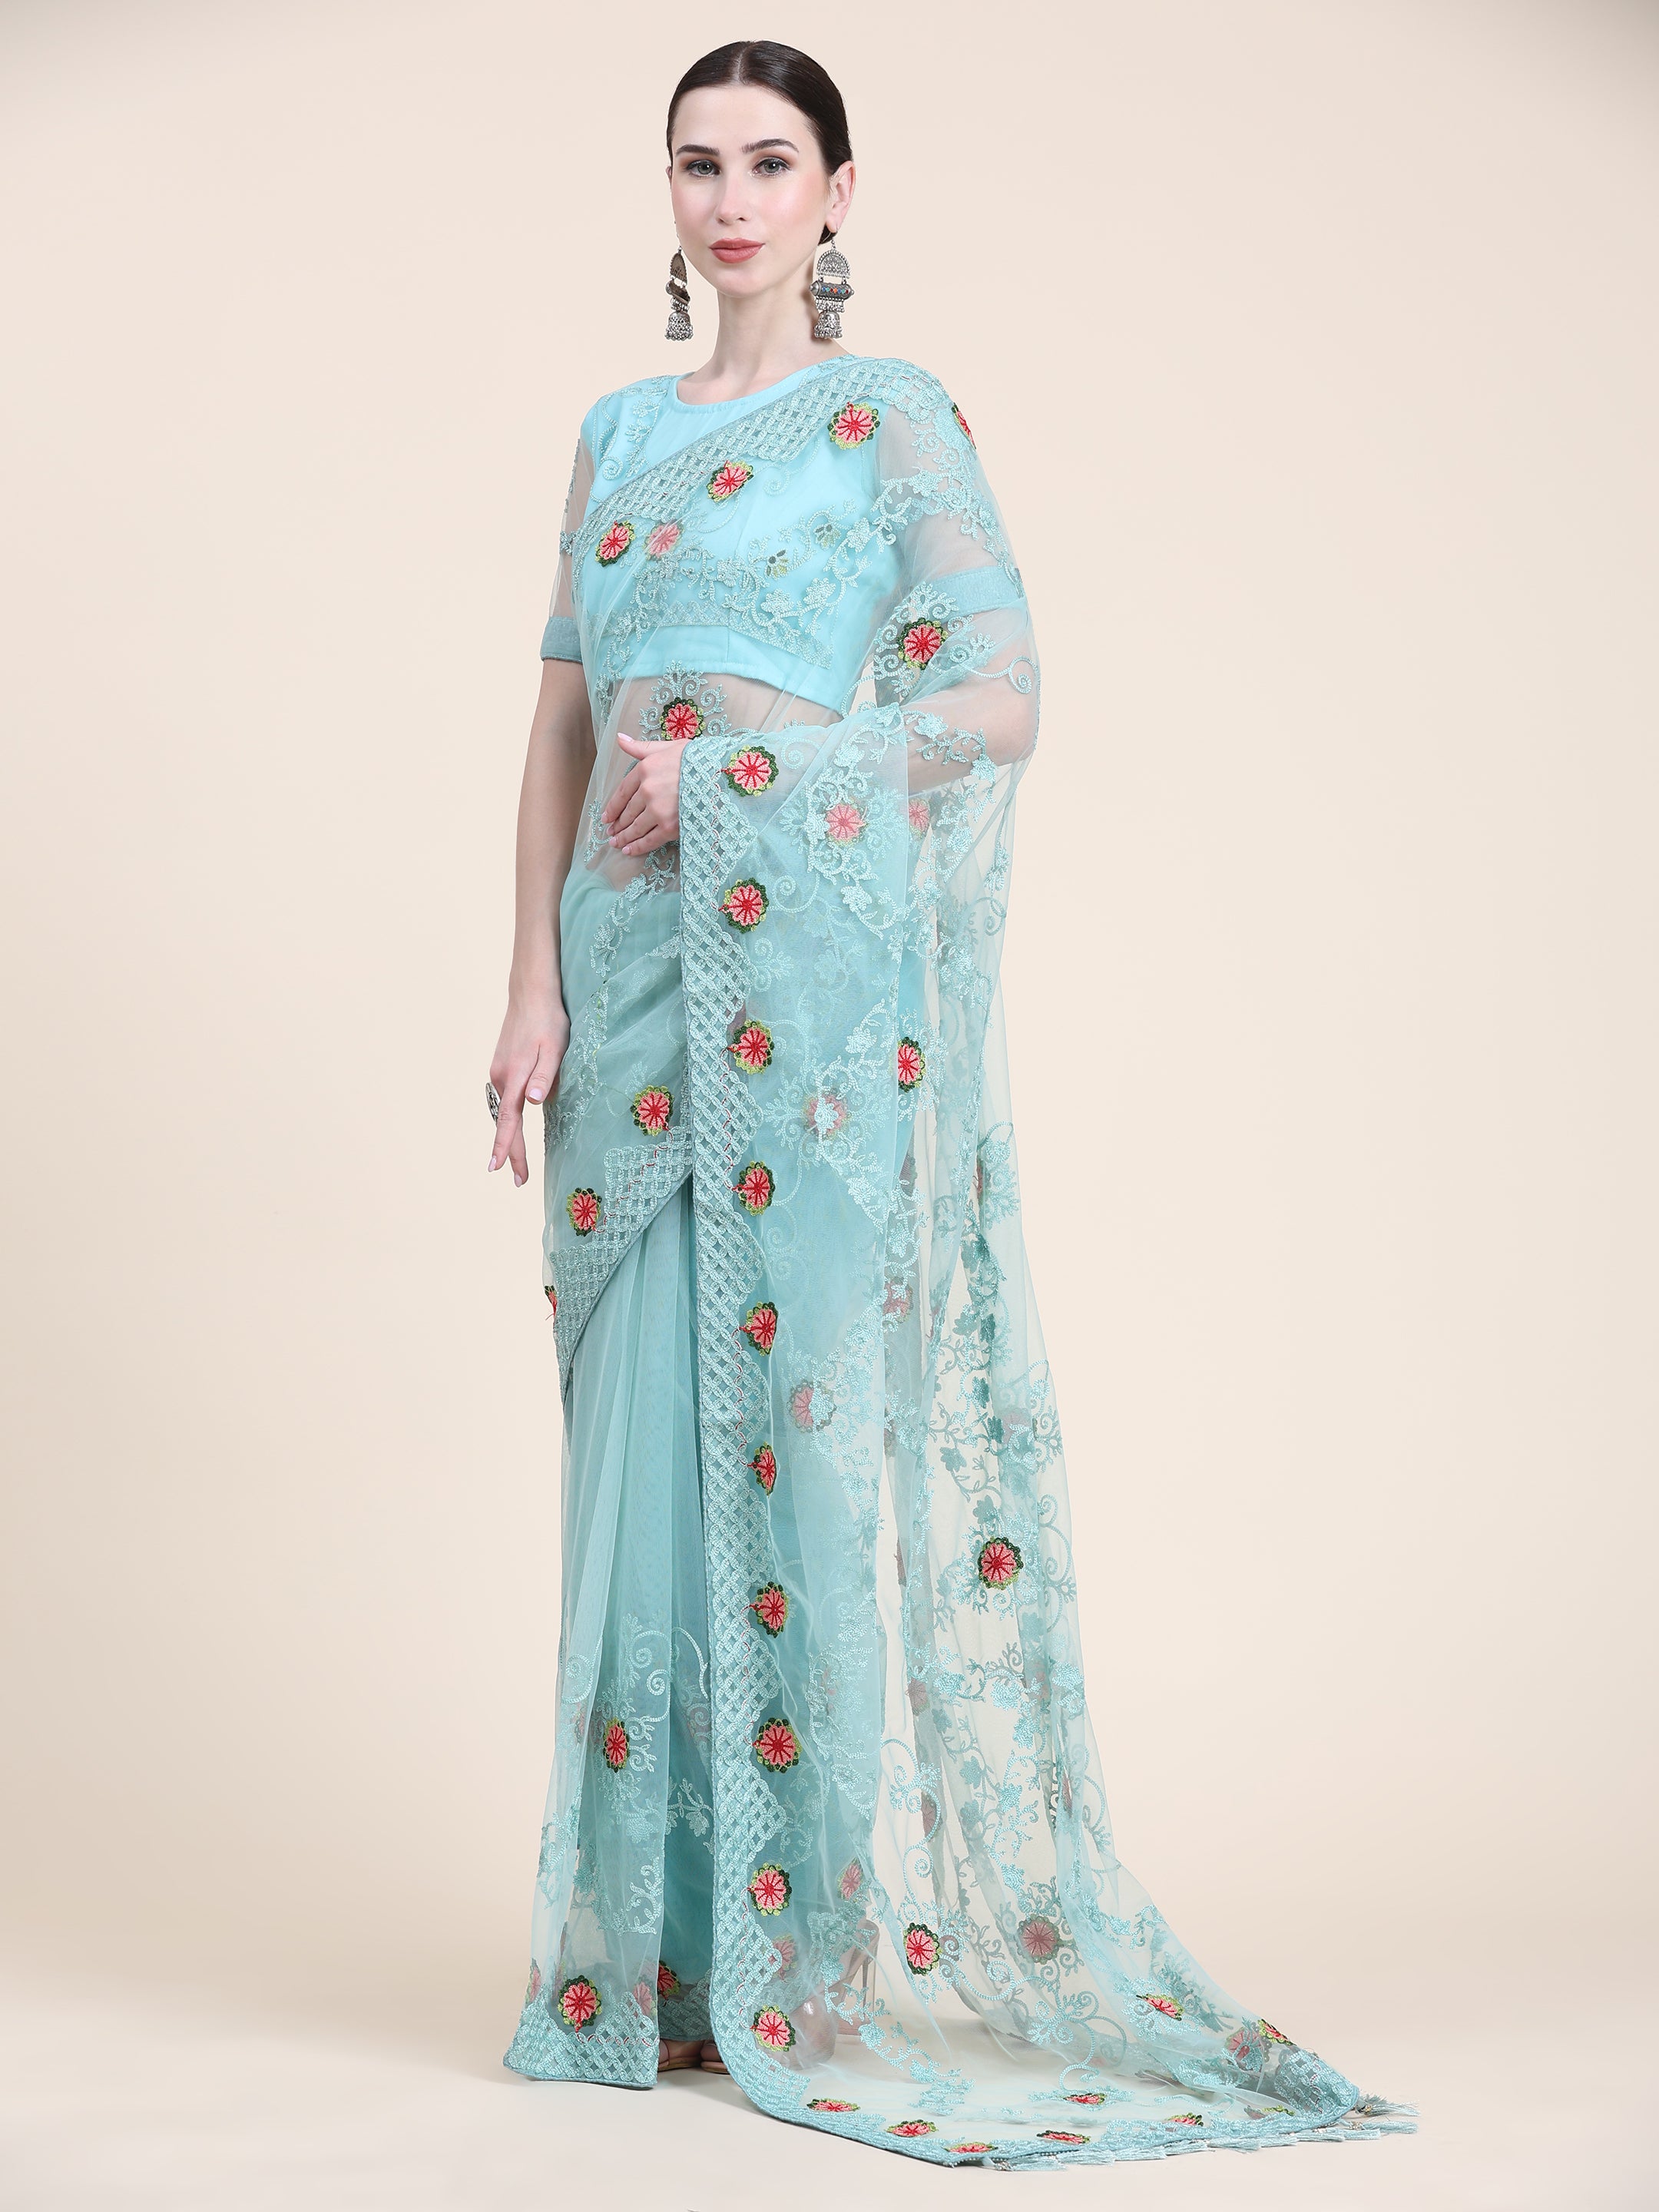 Women's Embroidery Paty Wear Contemporary Net Saree With Blouse Piece (Aqua Blue) - NIMIDHYA